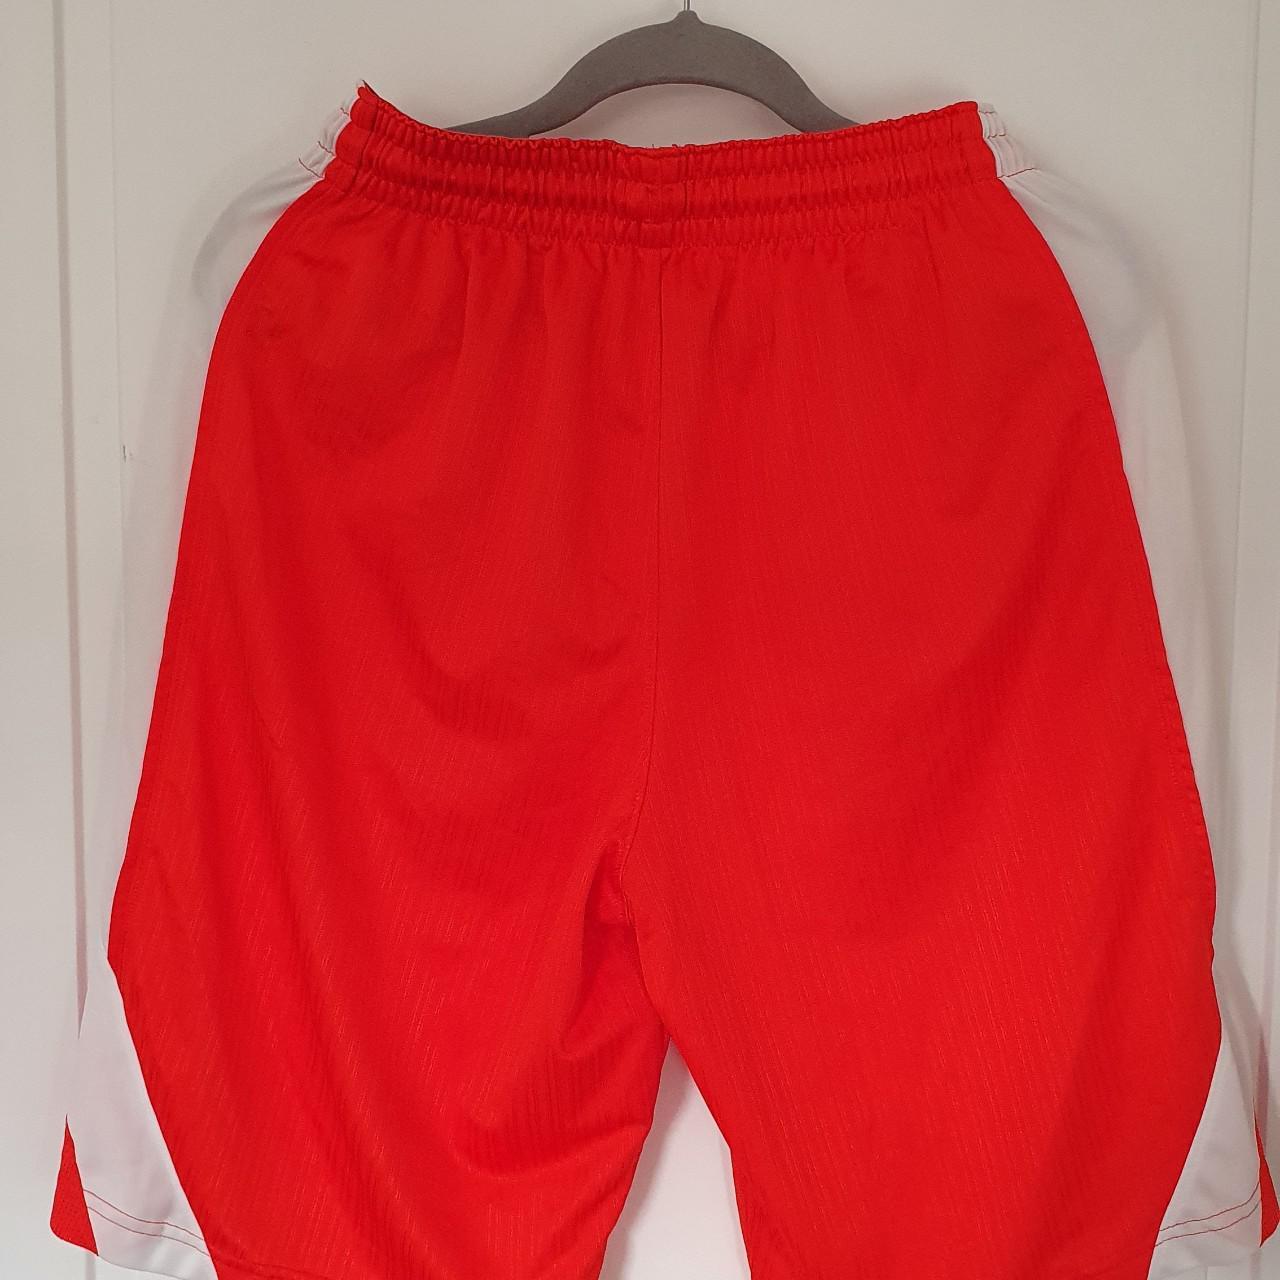 Product Image 3 - Nike brand basketball shorts in